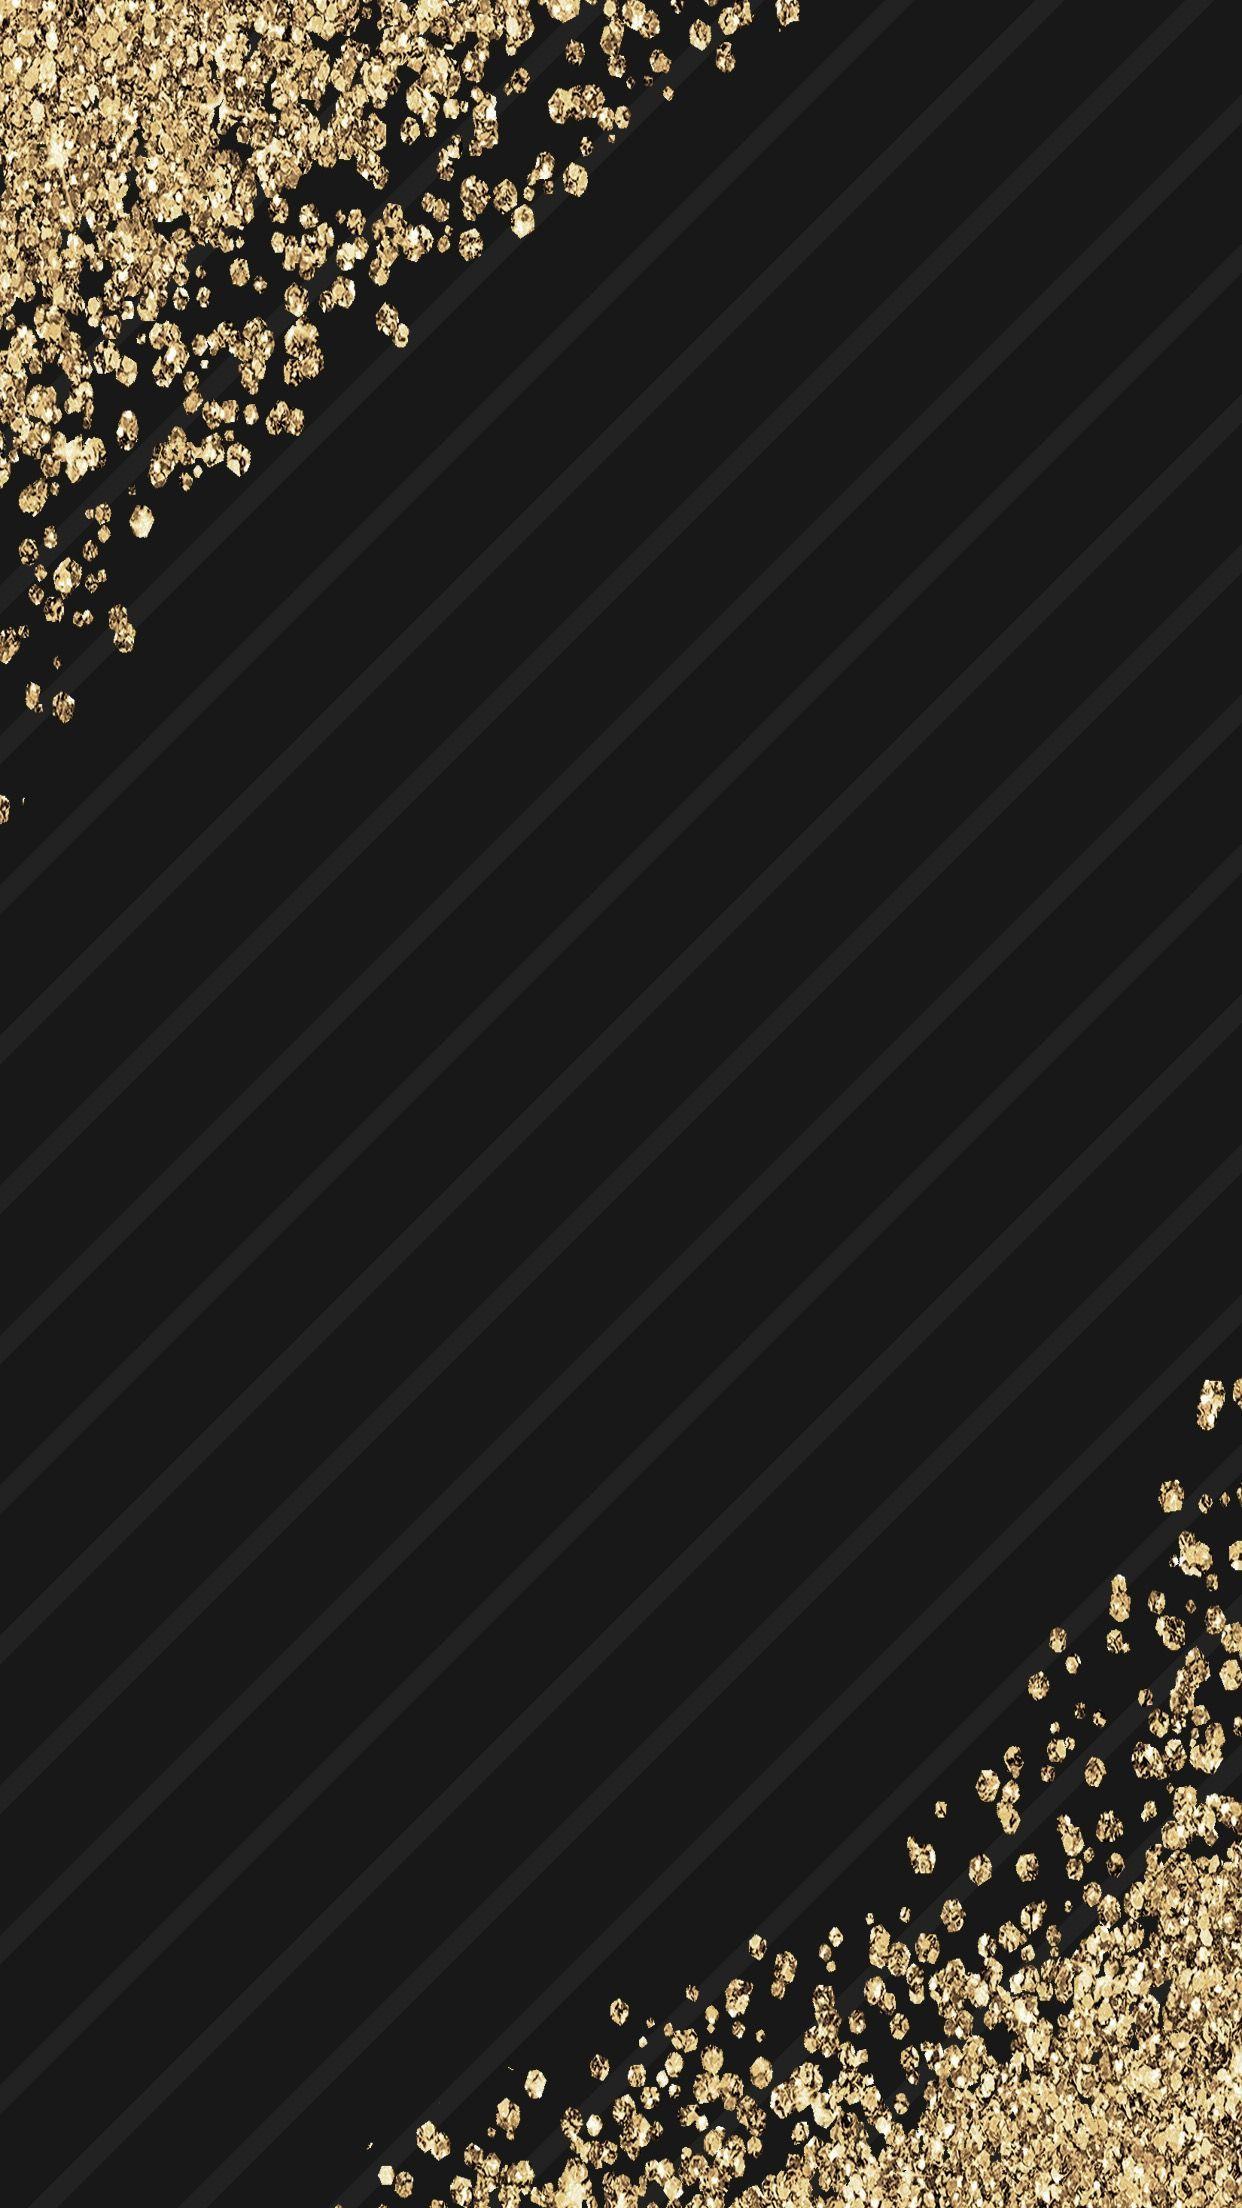 Black and Gold Wallpaper Free Black and Gold